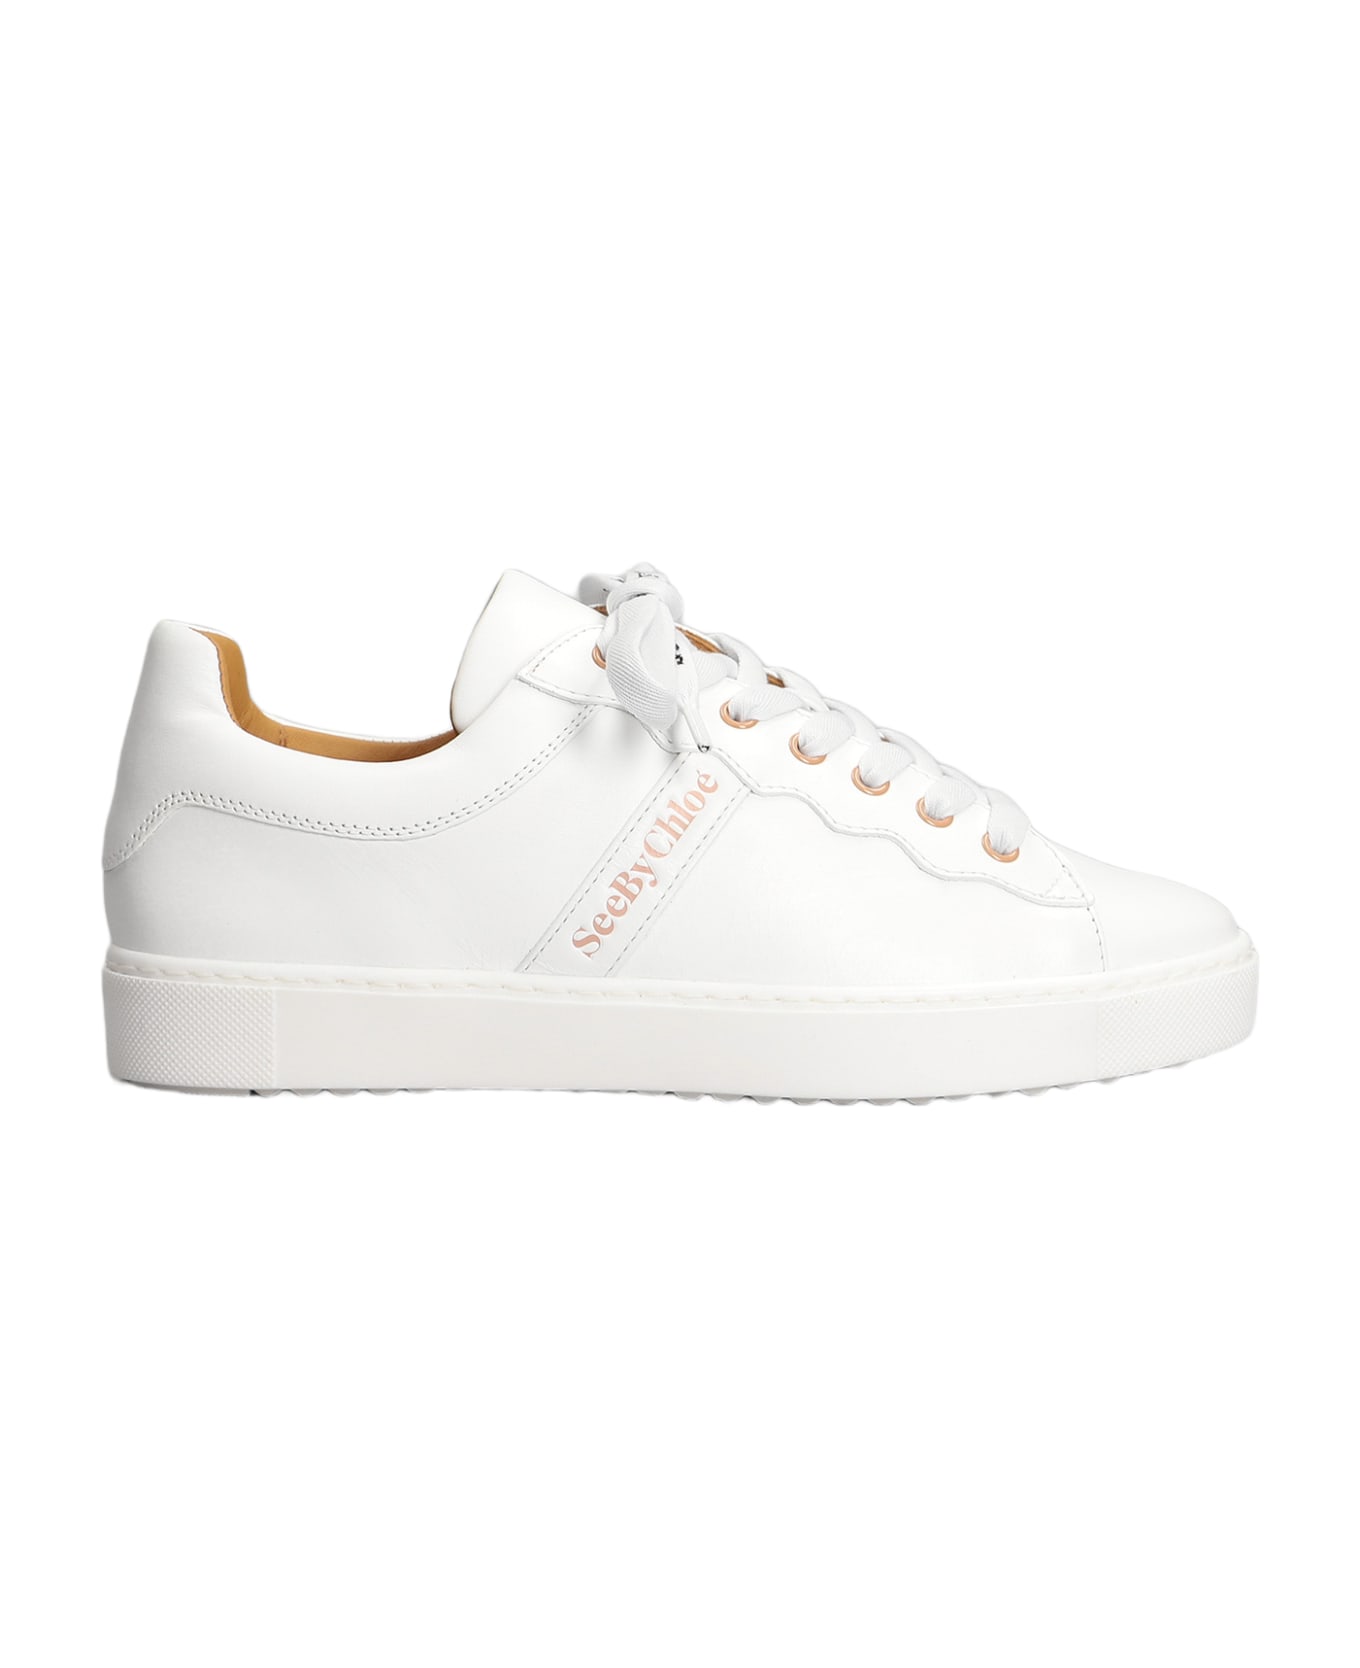 See by Chloé Essie Sneakers In White Leather - Bianco